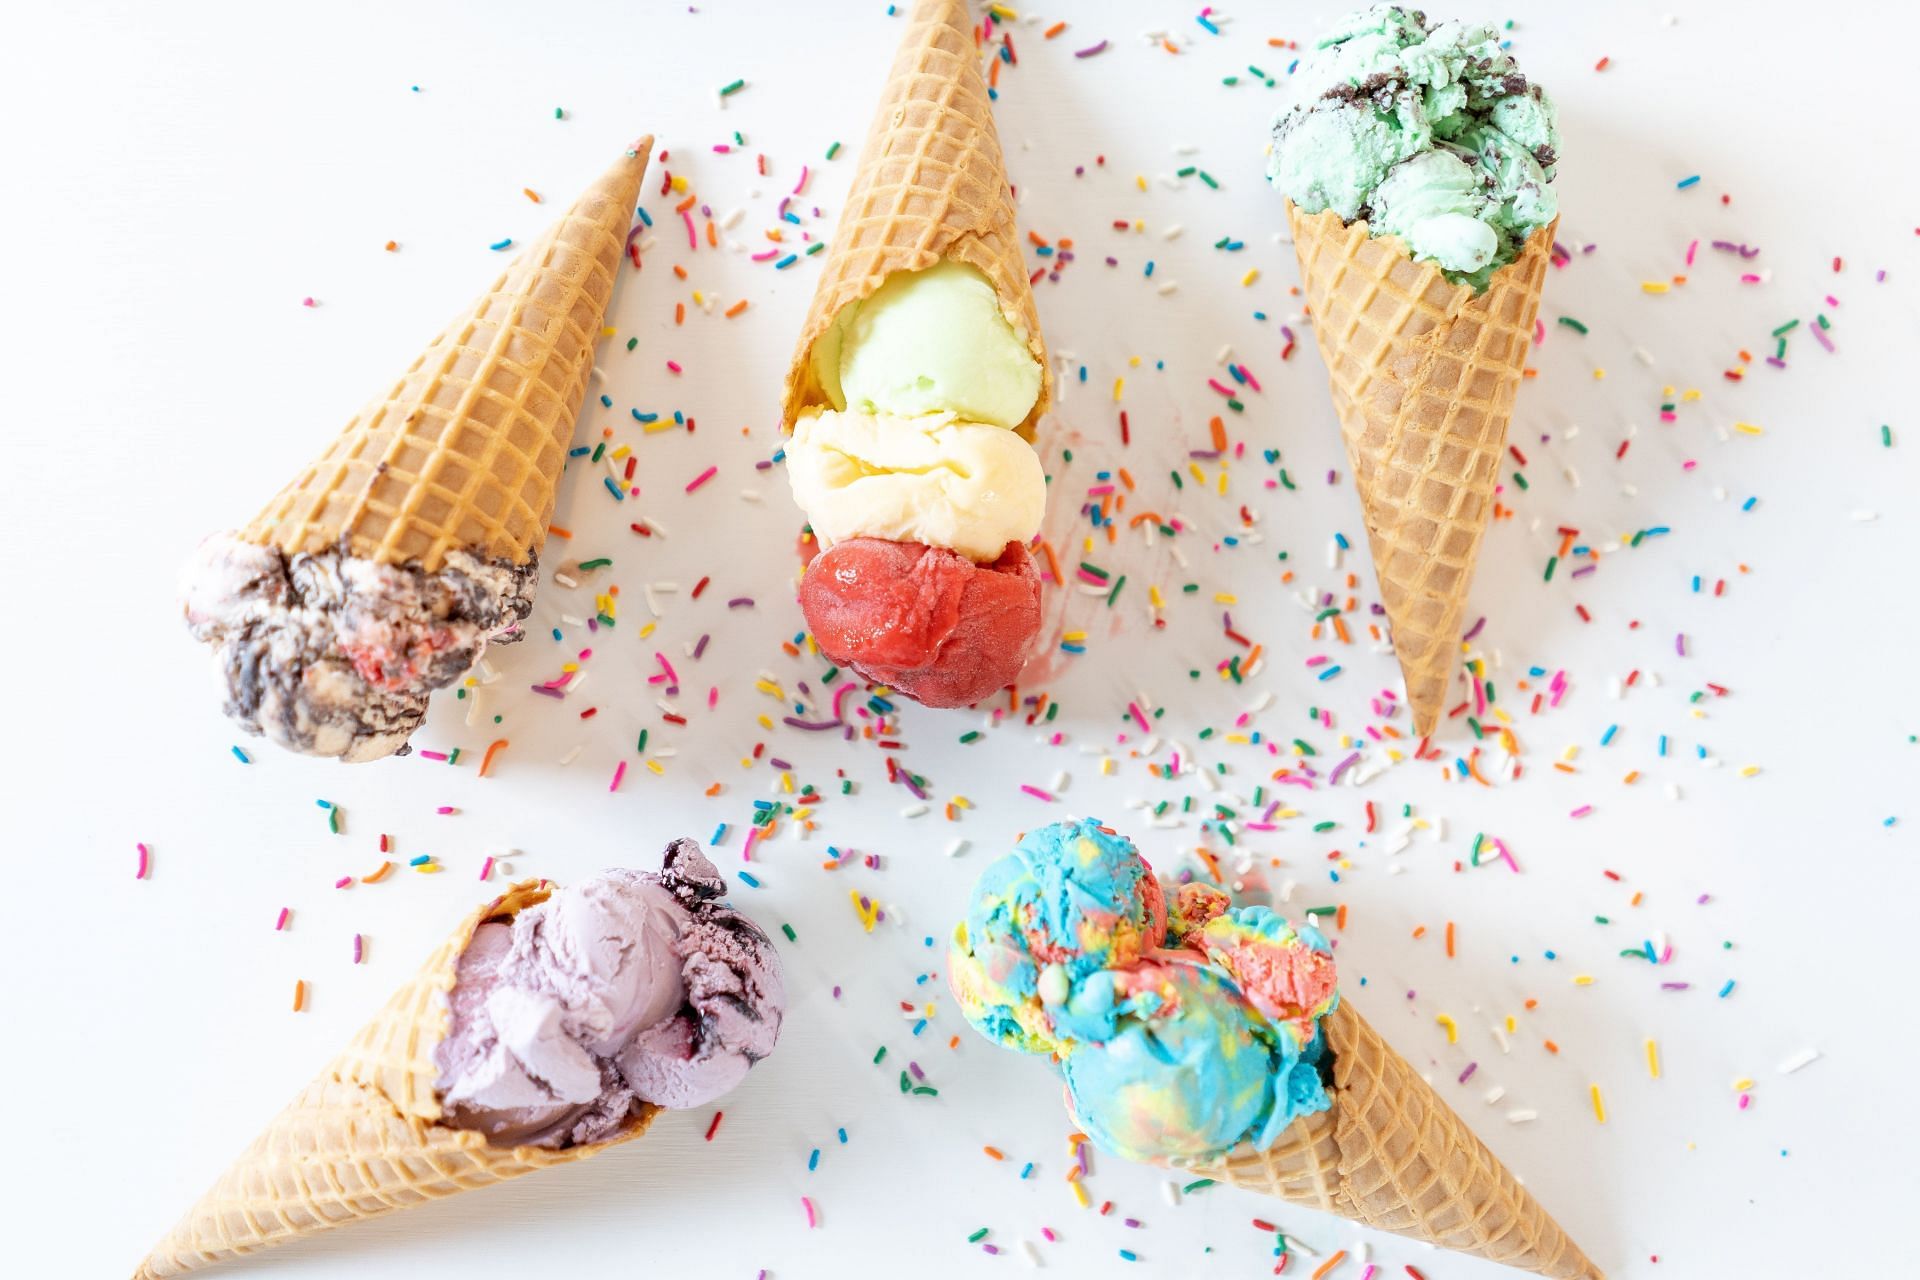 Ice creams are sugary desserts and are harmful for health. (Image via Unsplash/Courtney Cook)